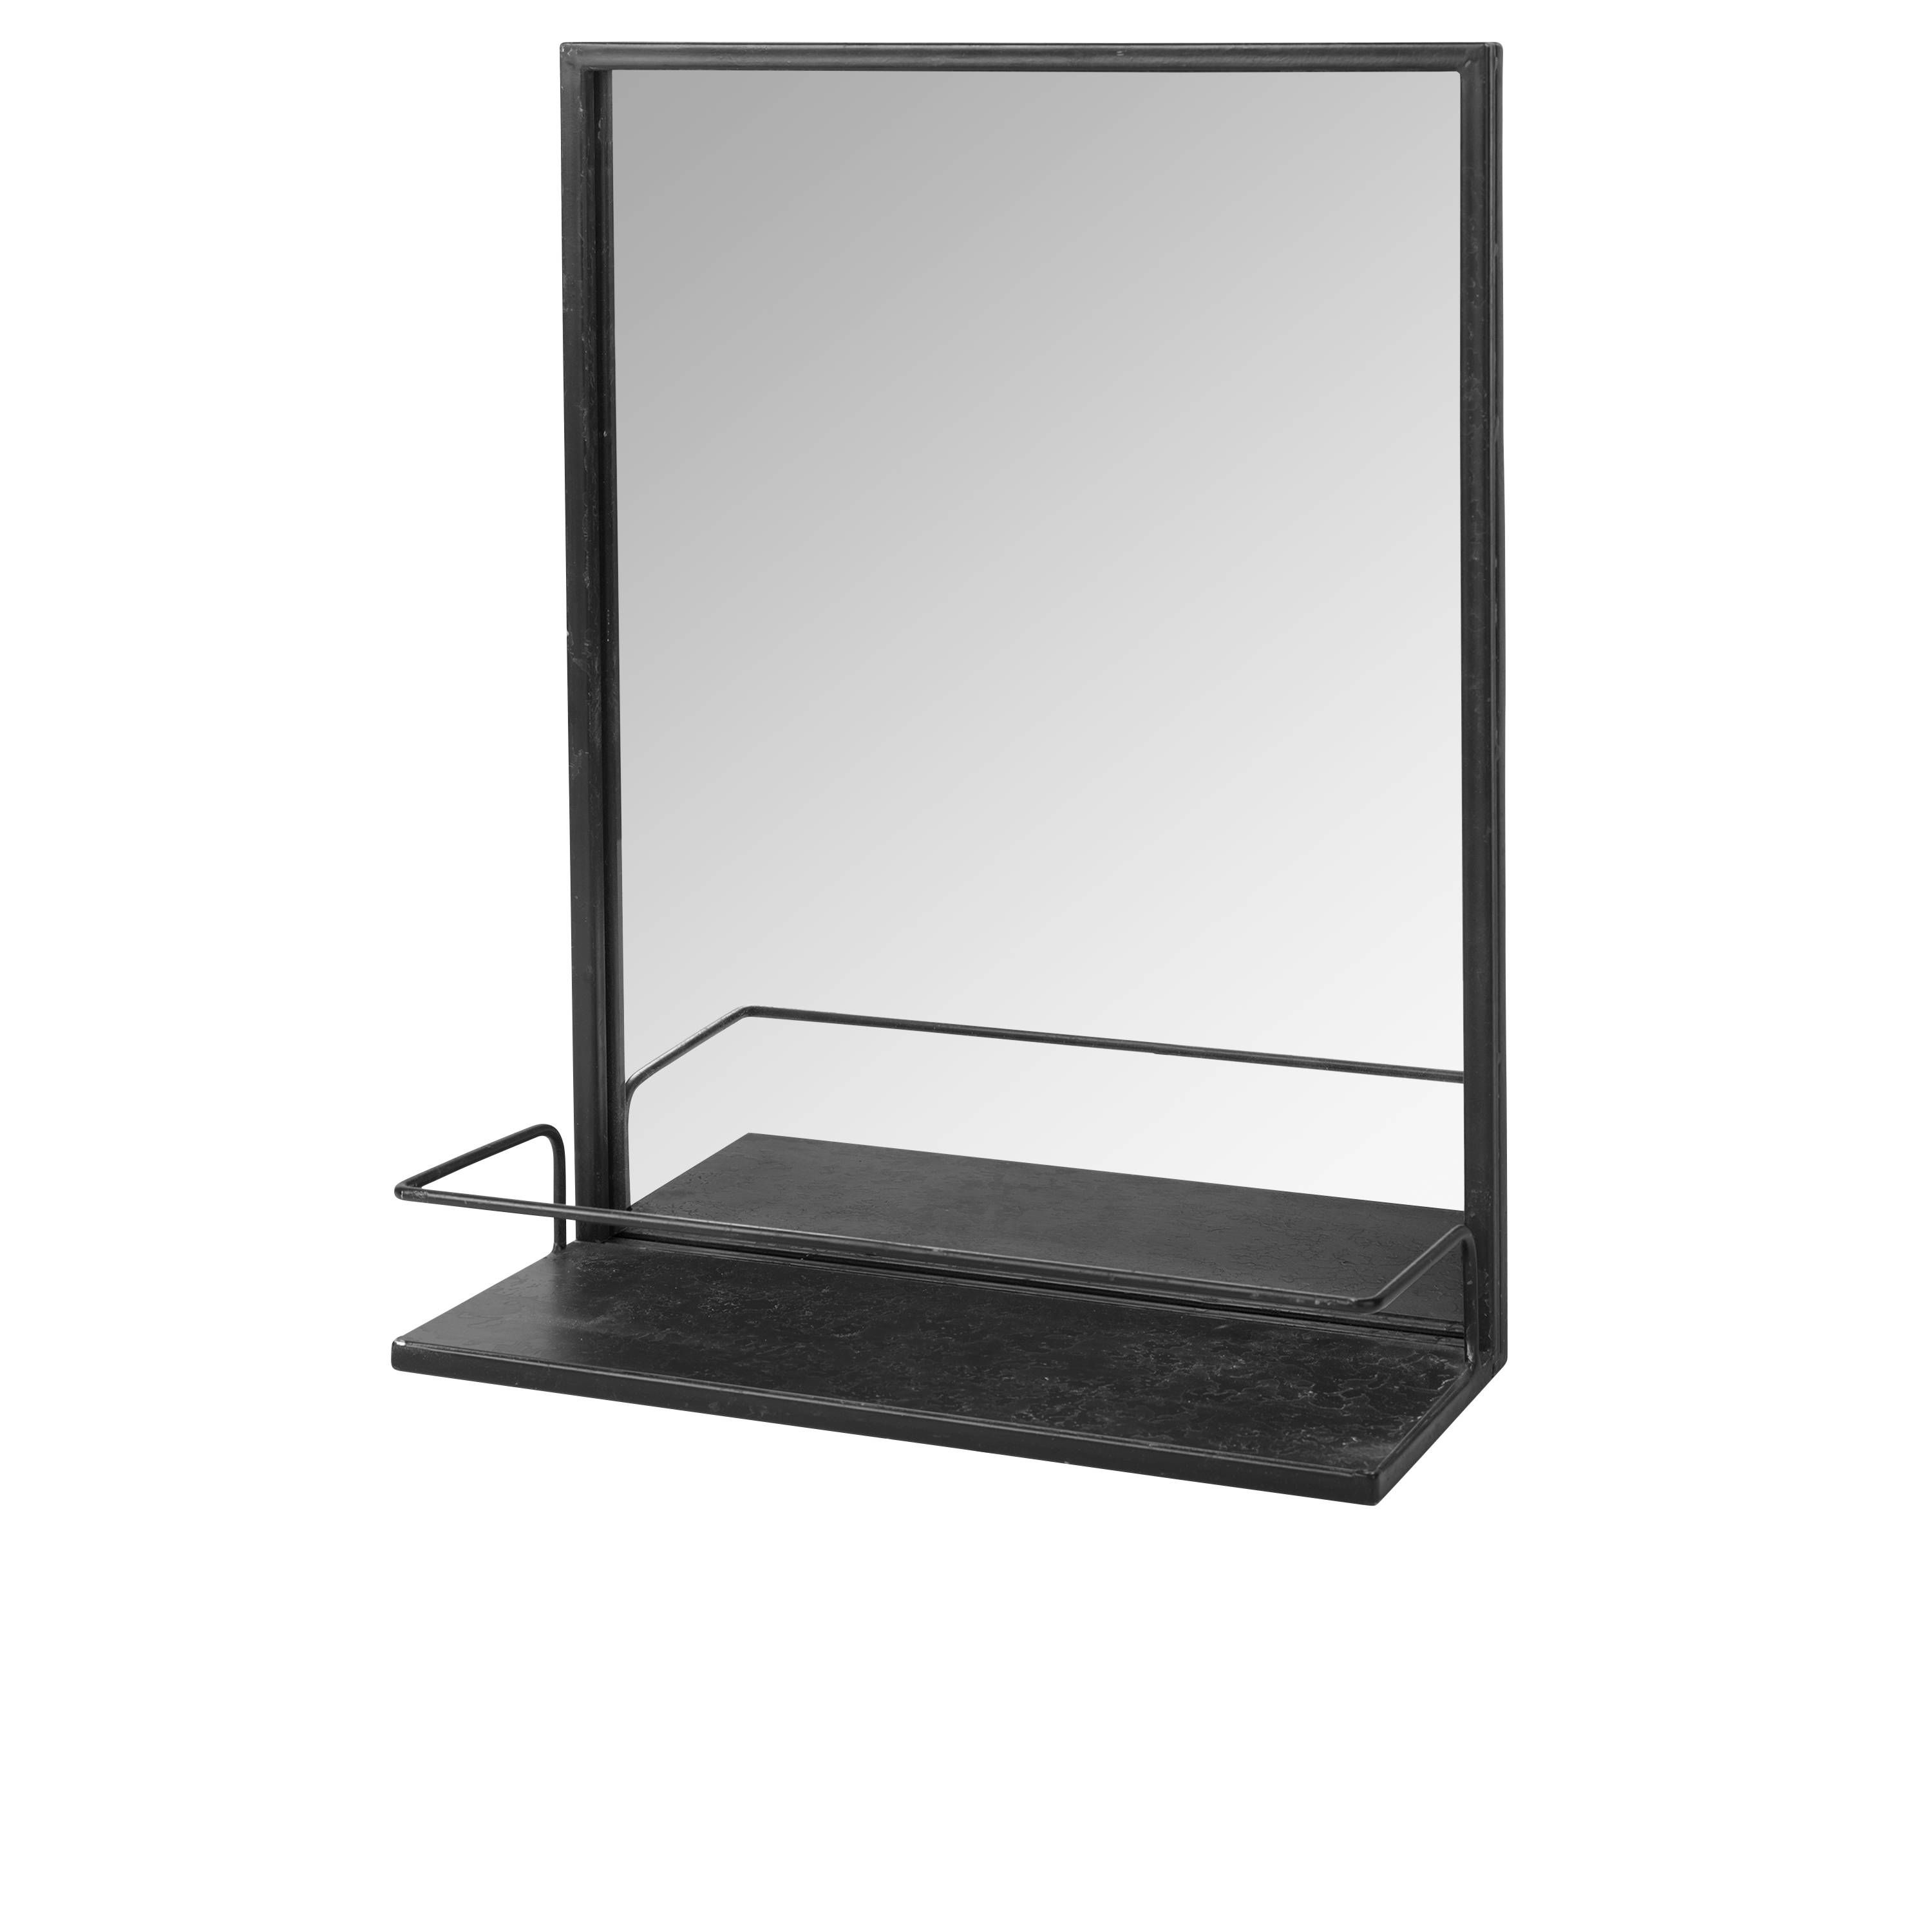 Broste Iron Framed Mirror With Shelf – Mon Pote Within Iron Framed Mirrors (View 19 of 25)